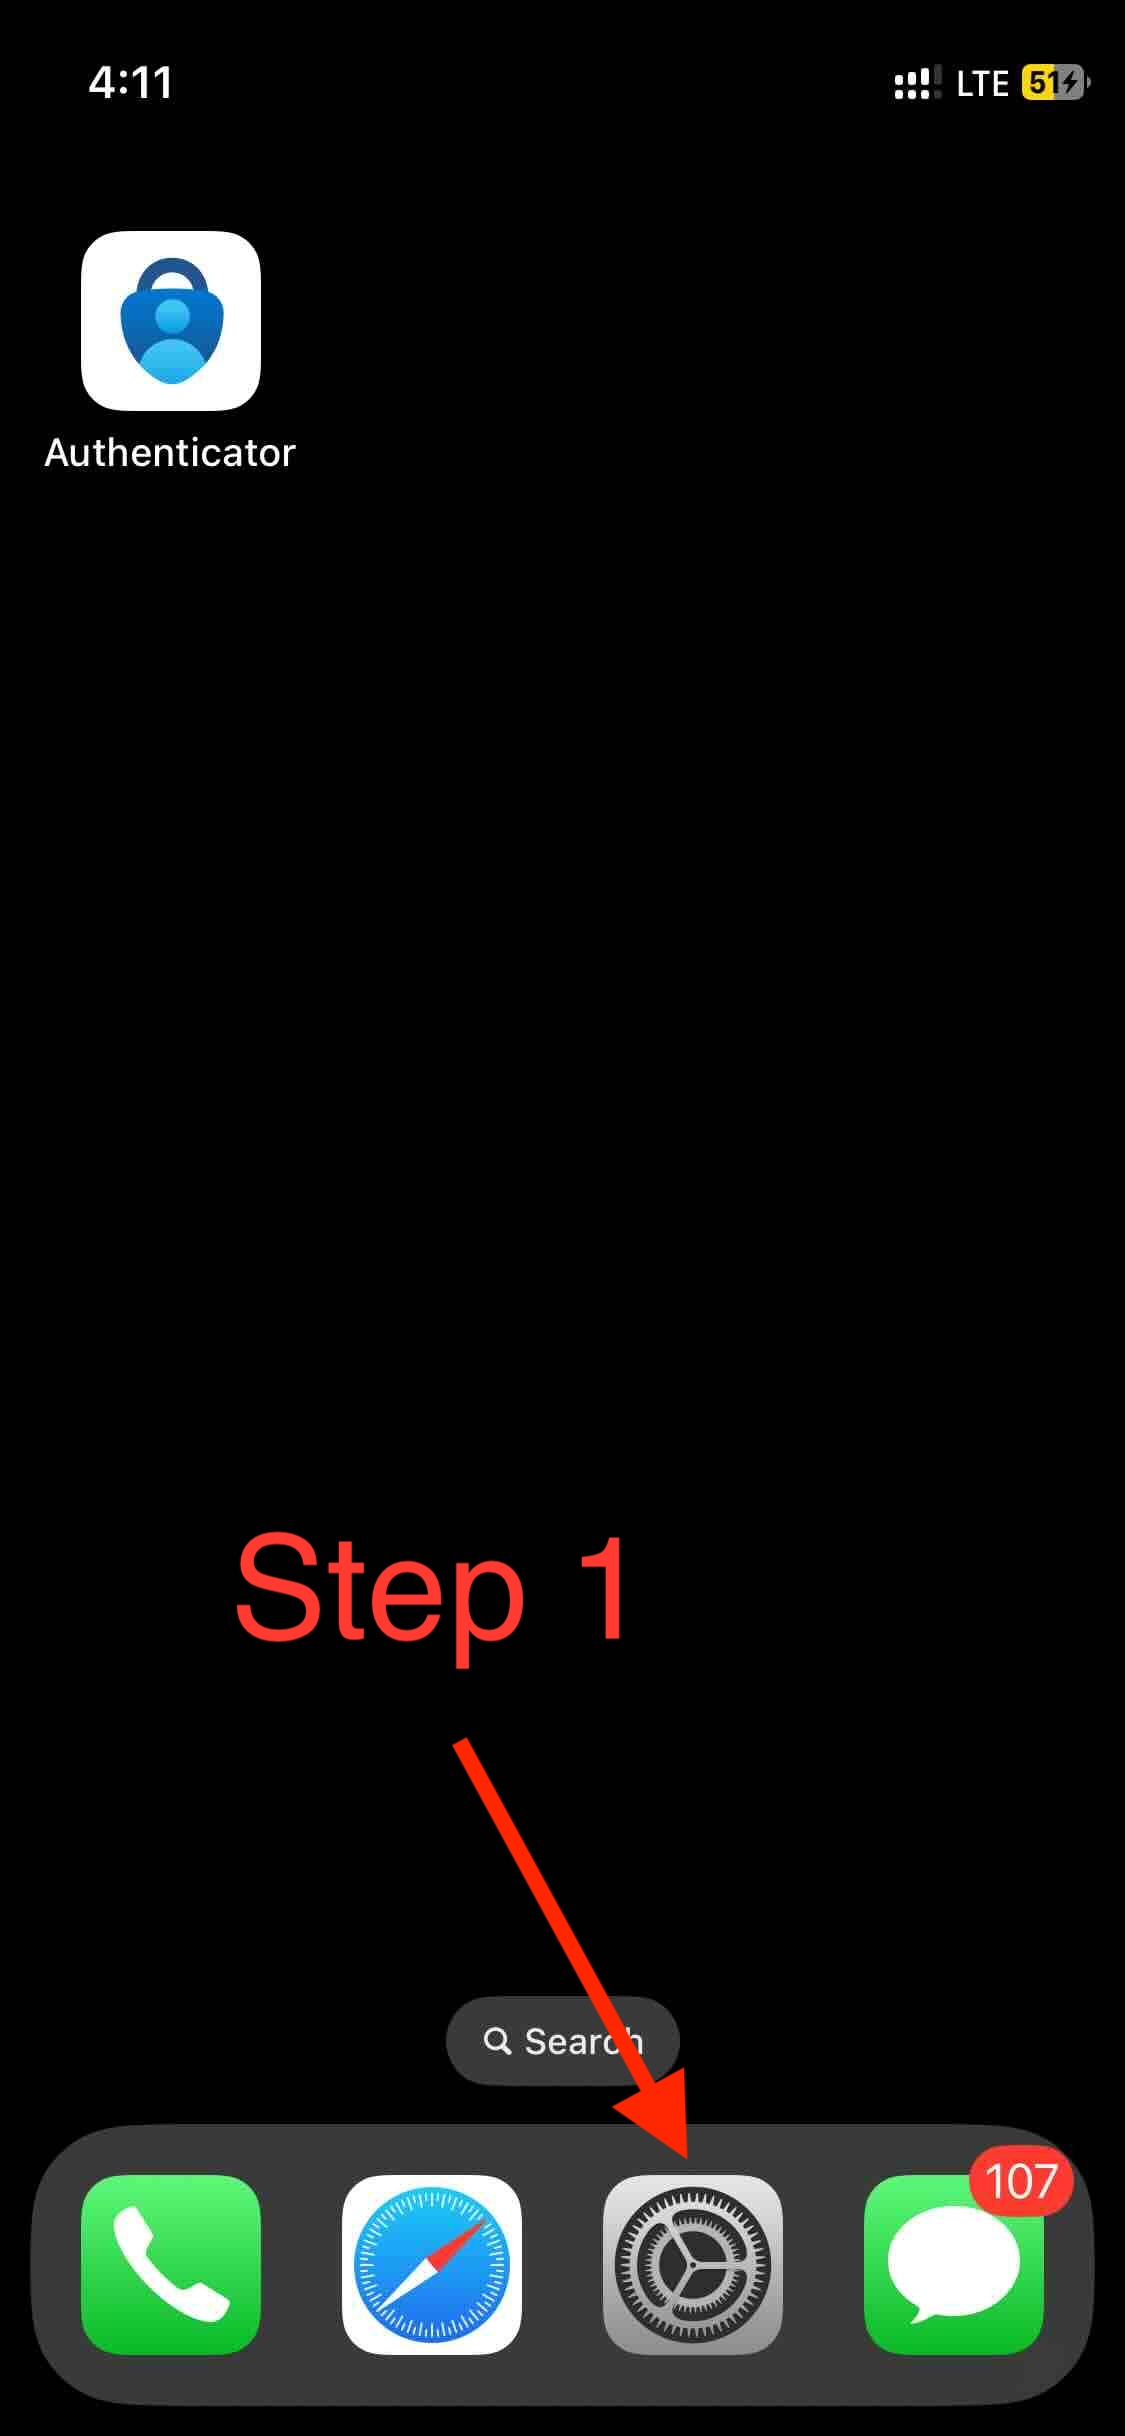 Step 1 - Go to Settings App on iPhone